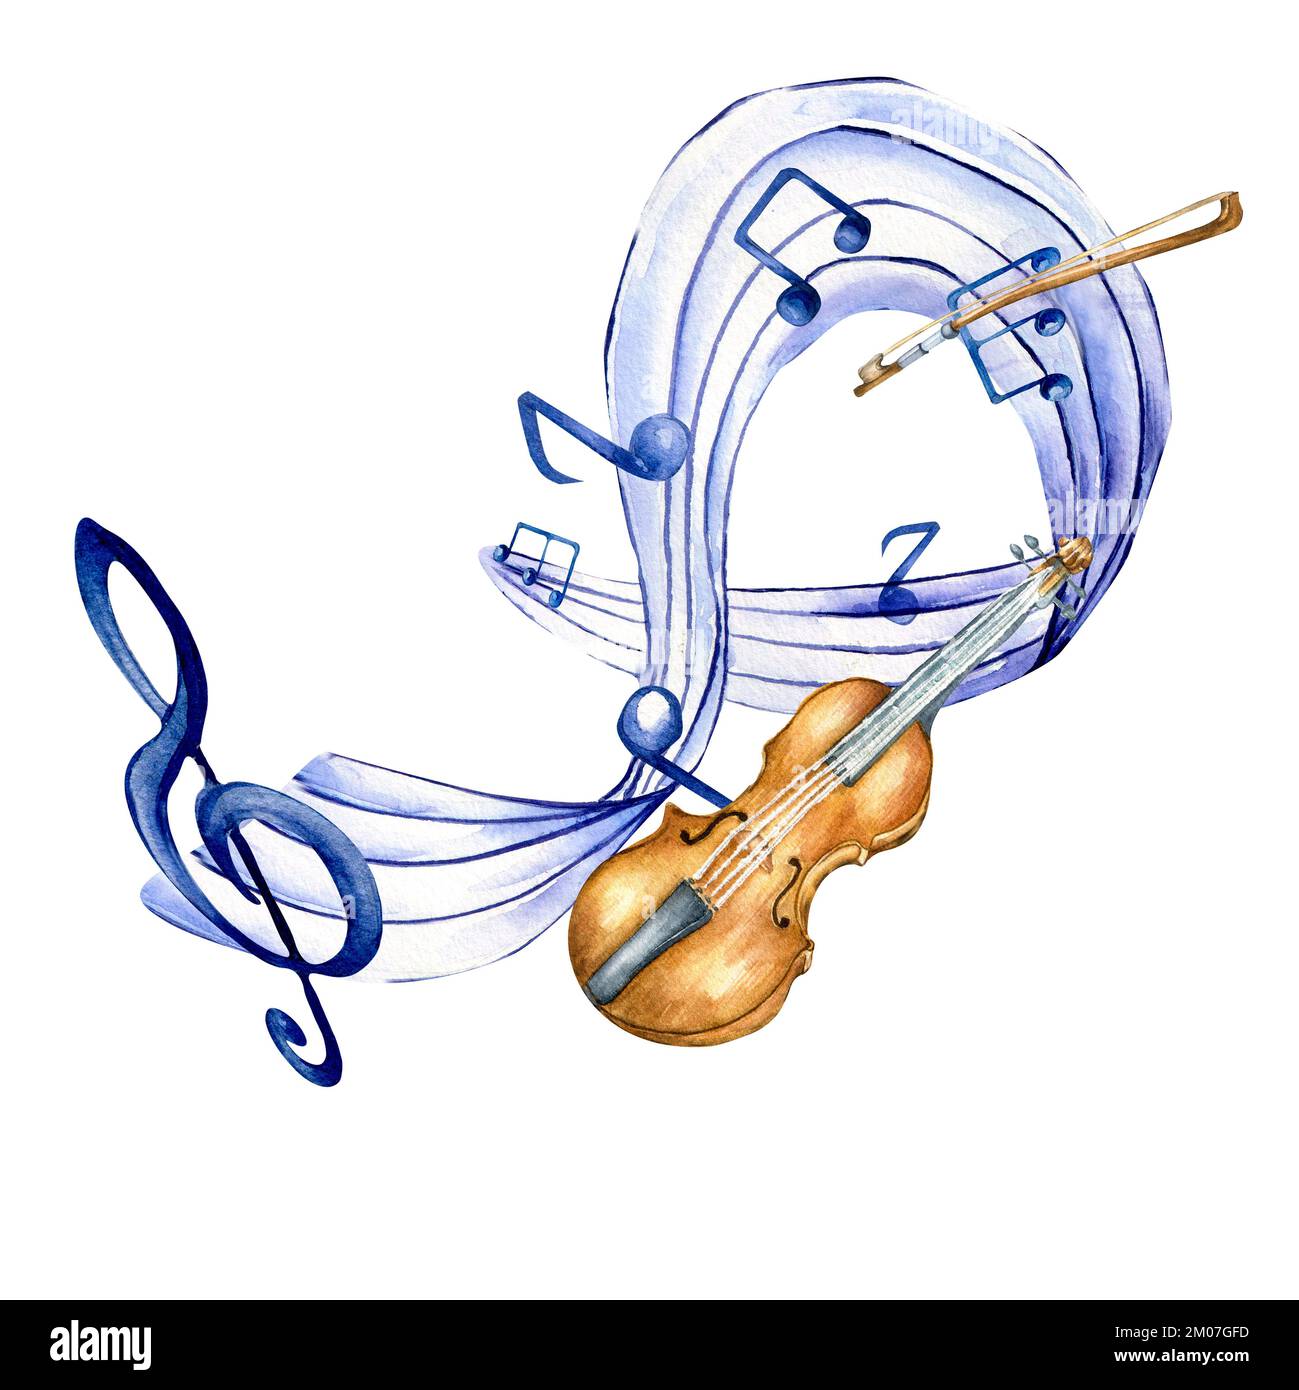 Treble clef, musical notes and fiddle watercolor illustration on white. Violin musical instrument and Ireland symbol hand drawn. Design for flyer, con Stock Photo